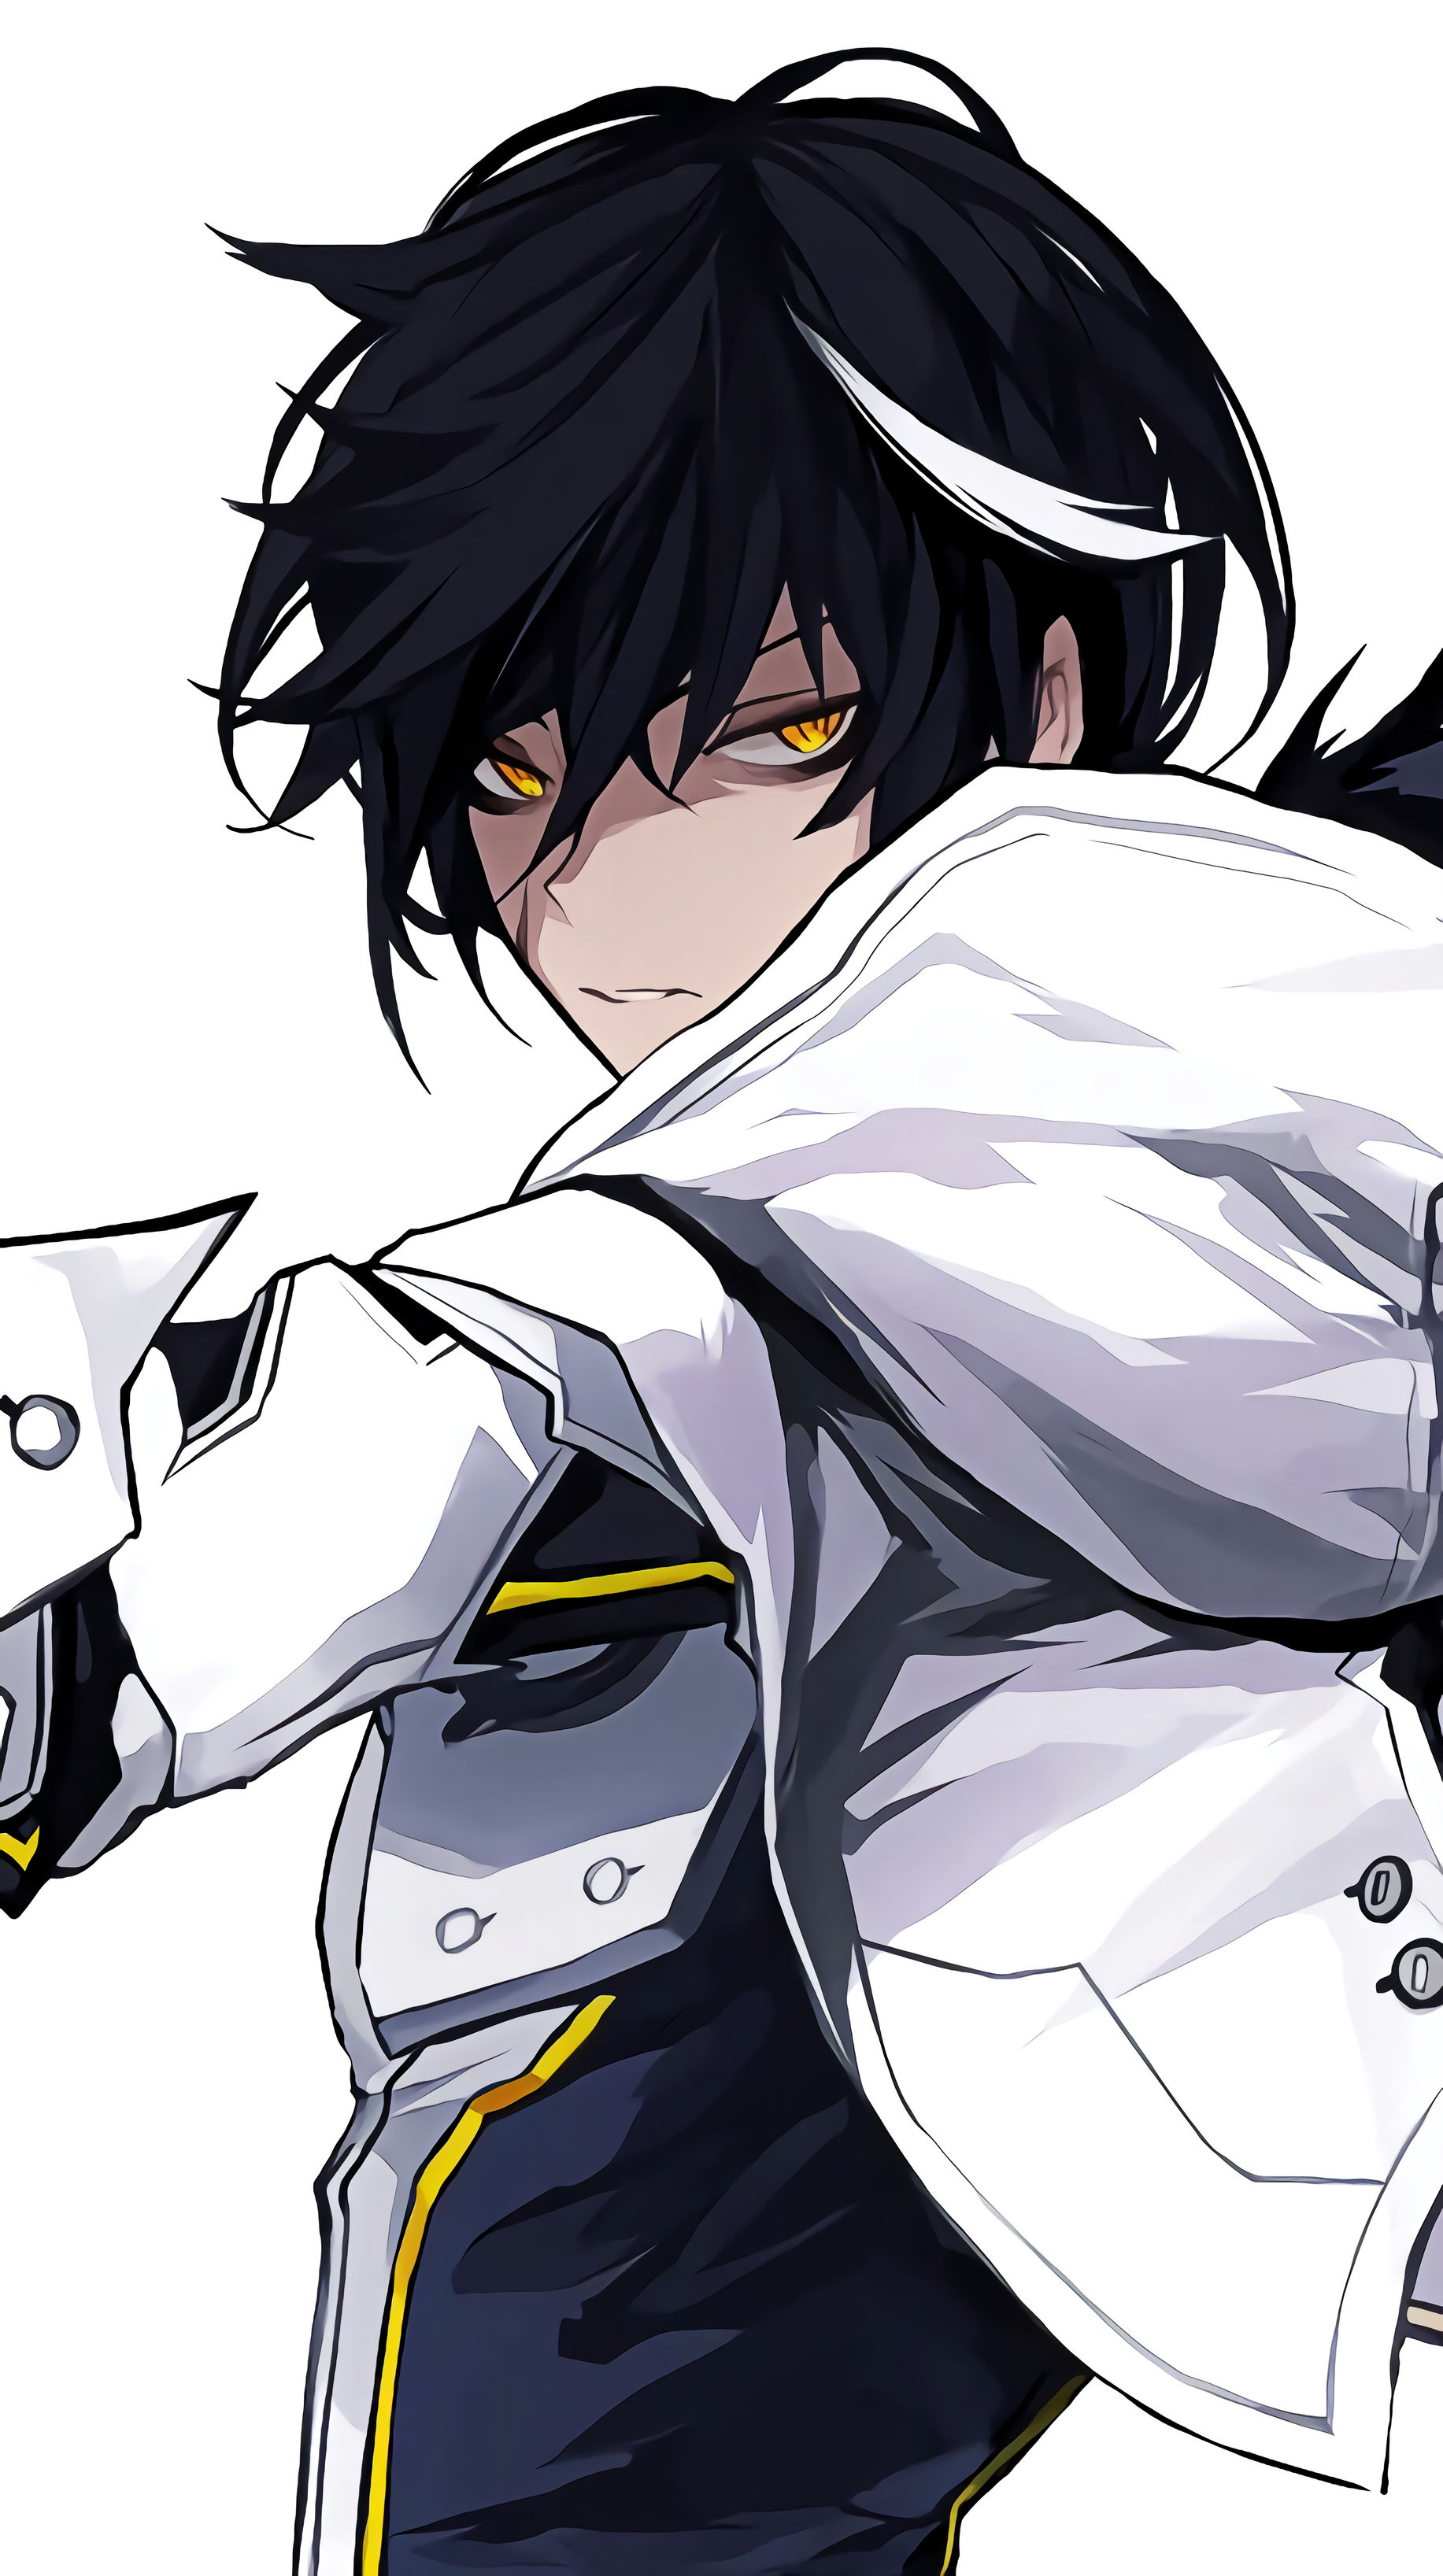 raven_furious_blade___elsword__by_asrielxiv_dcwg380-fullview.jpg